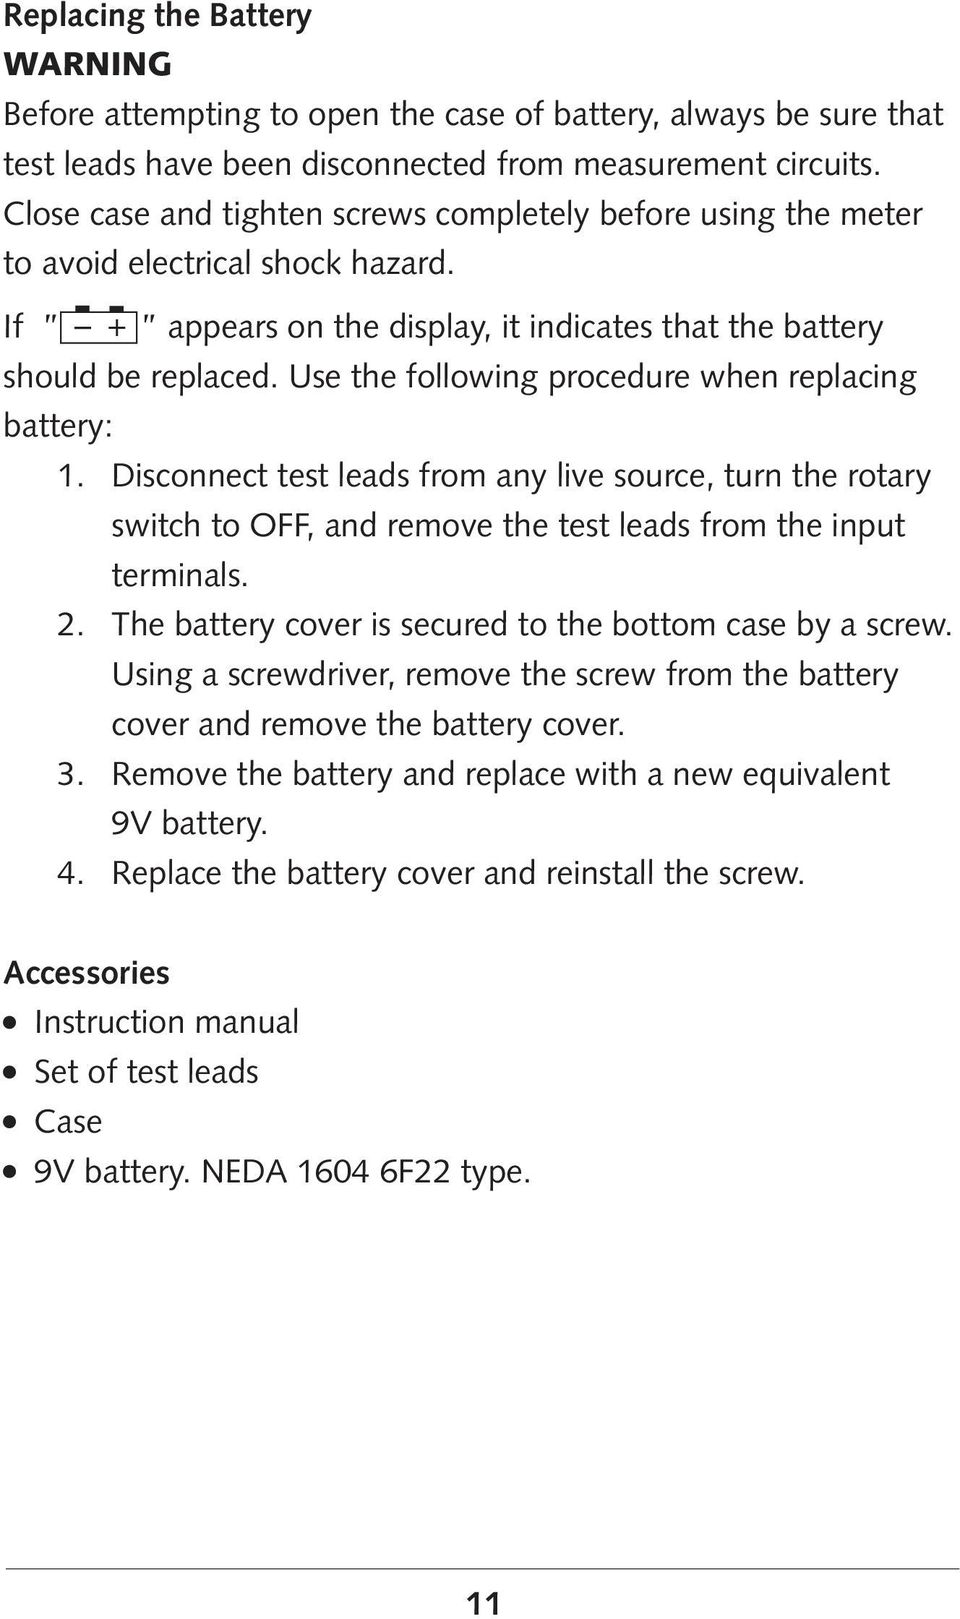 Use the following procedure when replacing battery: 1. Disconnect test leads from any live source, turn the rotary switch to OFF, and remove the test leads from the input terminals. 2.